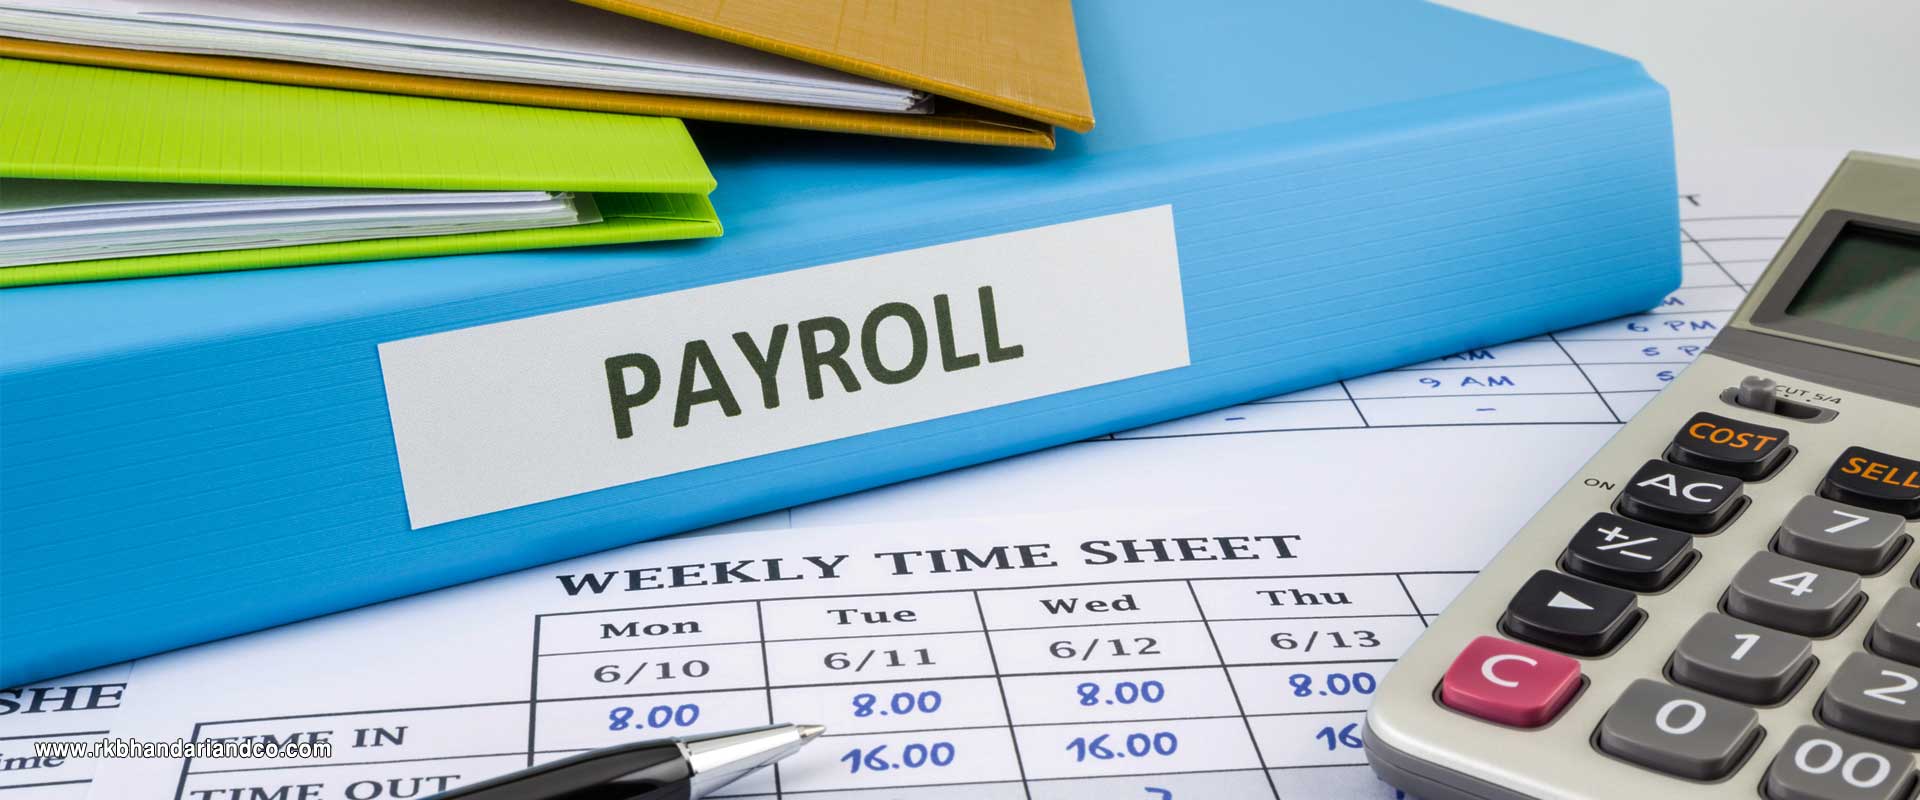 Employee Payroll Service Consultants Payroll Services Company Lawyers Advocates in India Ludhiana Punjab